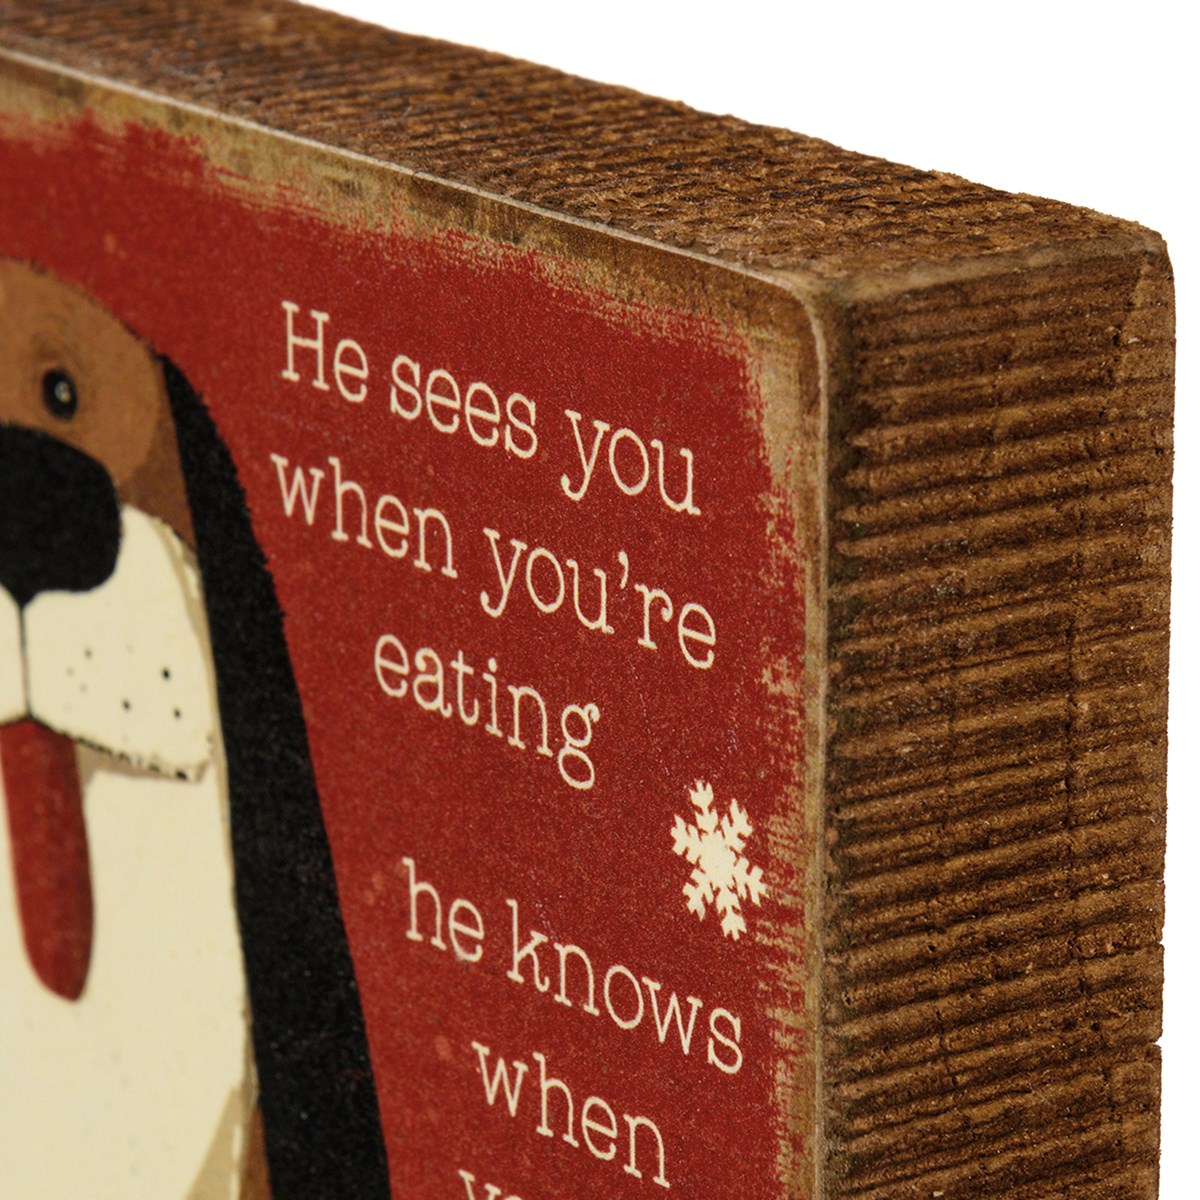 He Knows When You've Got Cookies Block Sign - Wood, Paper